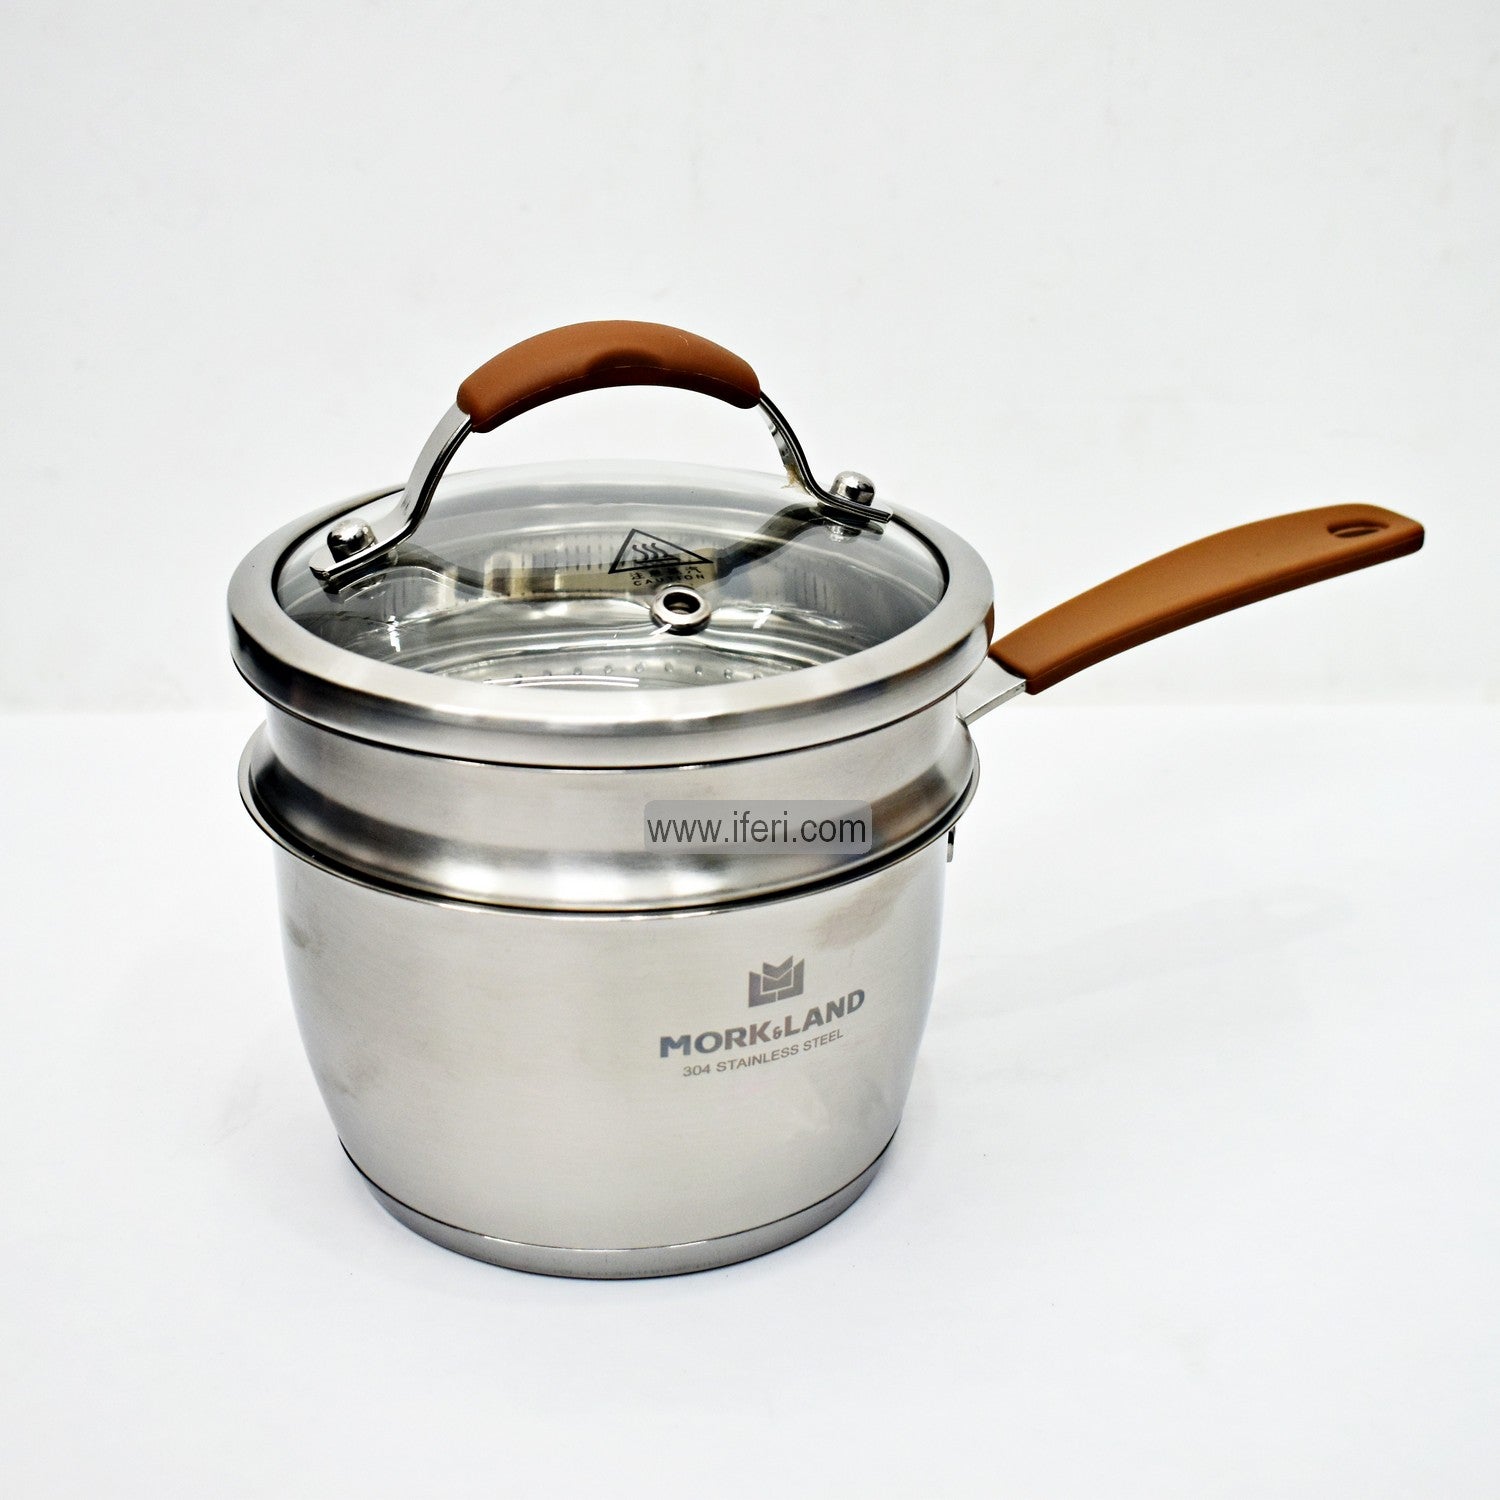 16cm Stainless Steel Milk Pan with Steamer RY06361